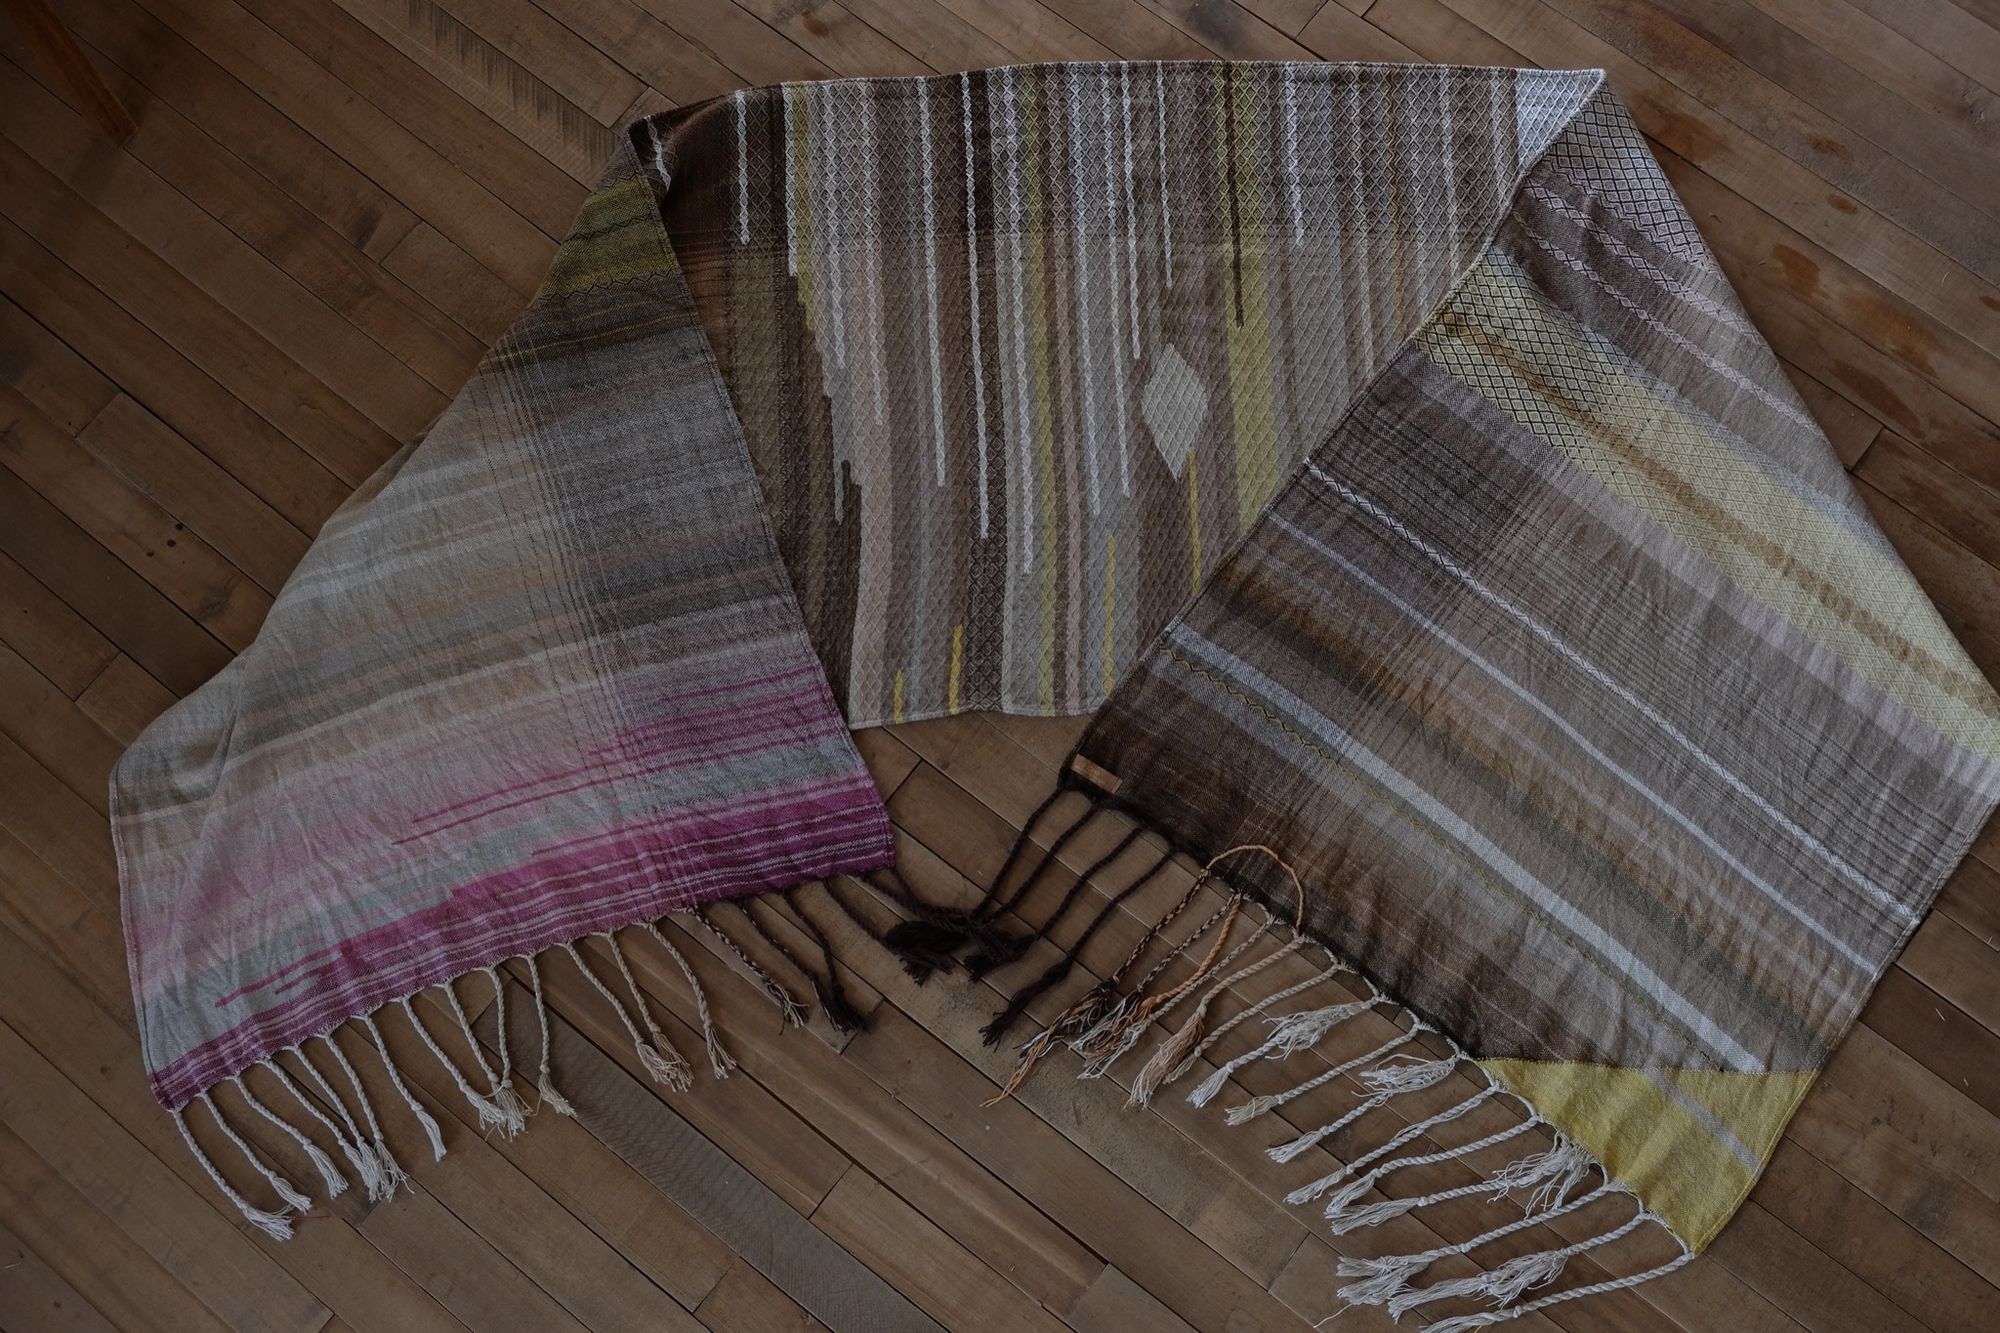 handwoven diamond pattern and geometric details in browns, tan, yellows, whites and pinks laying on a wooden floor